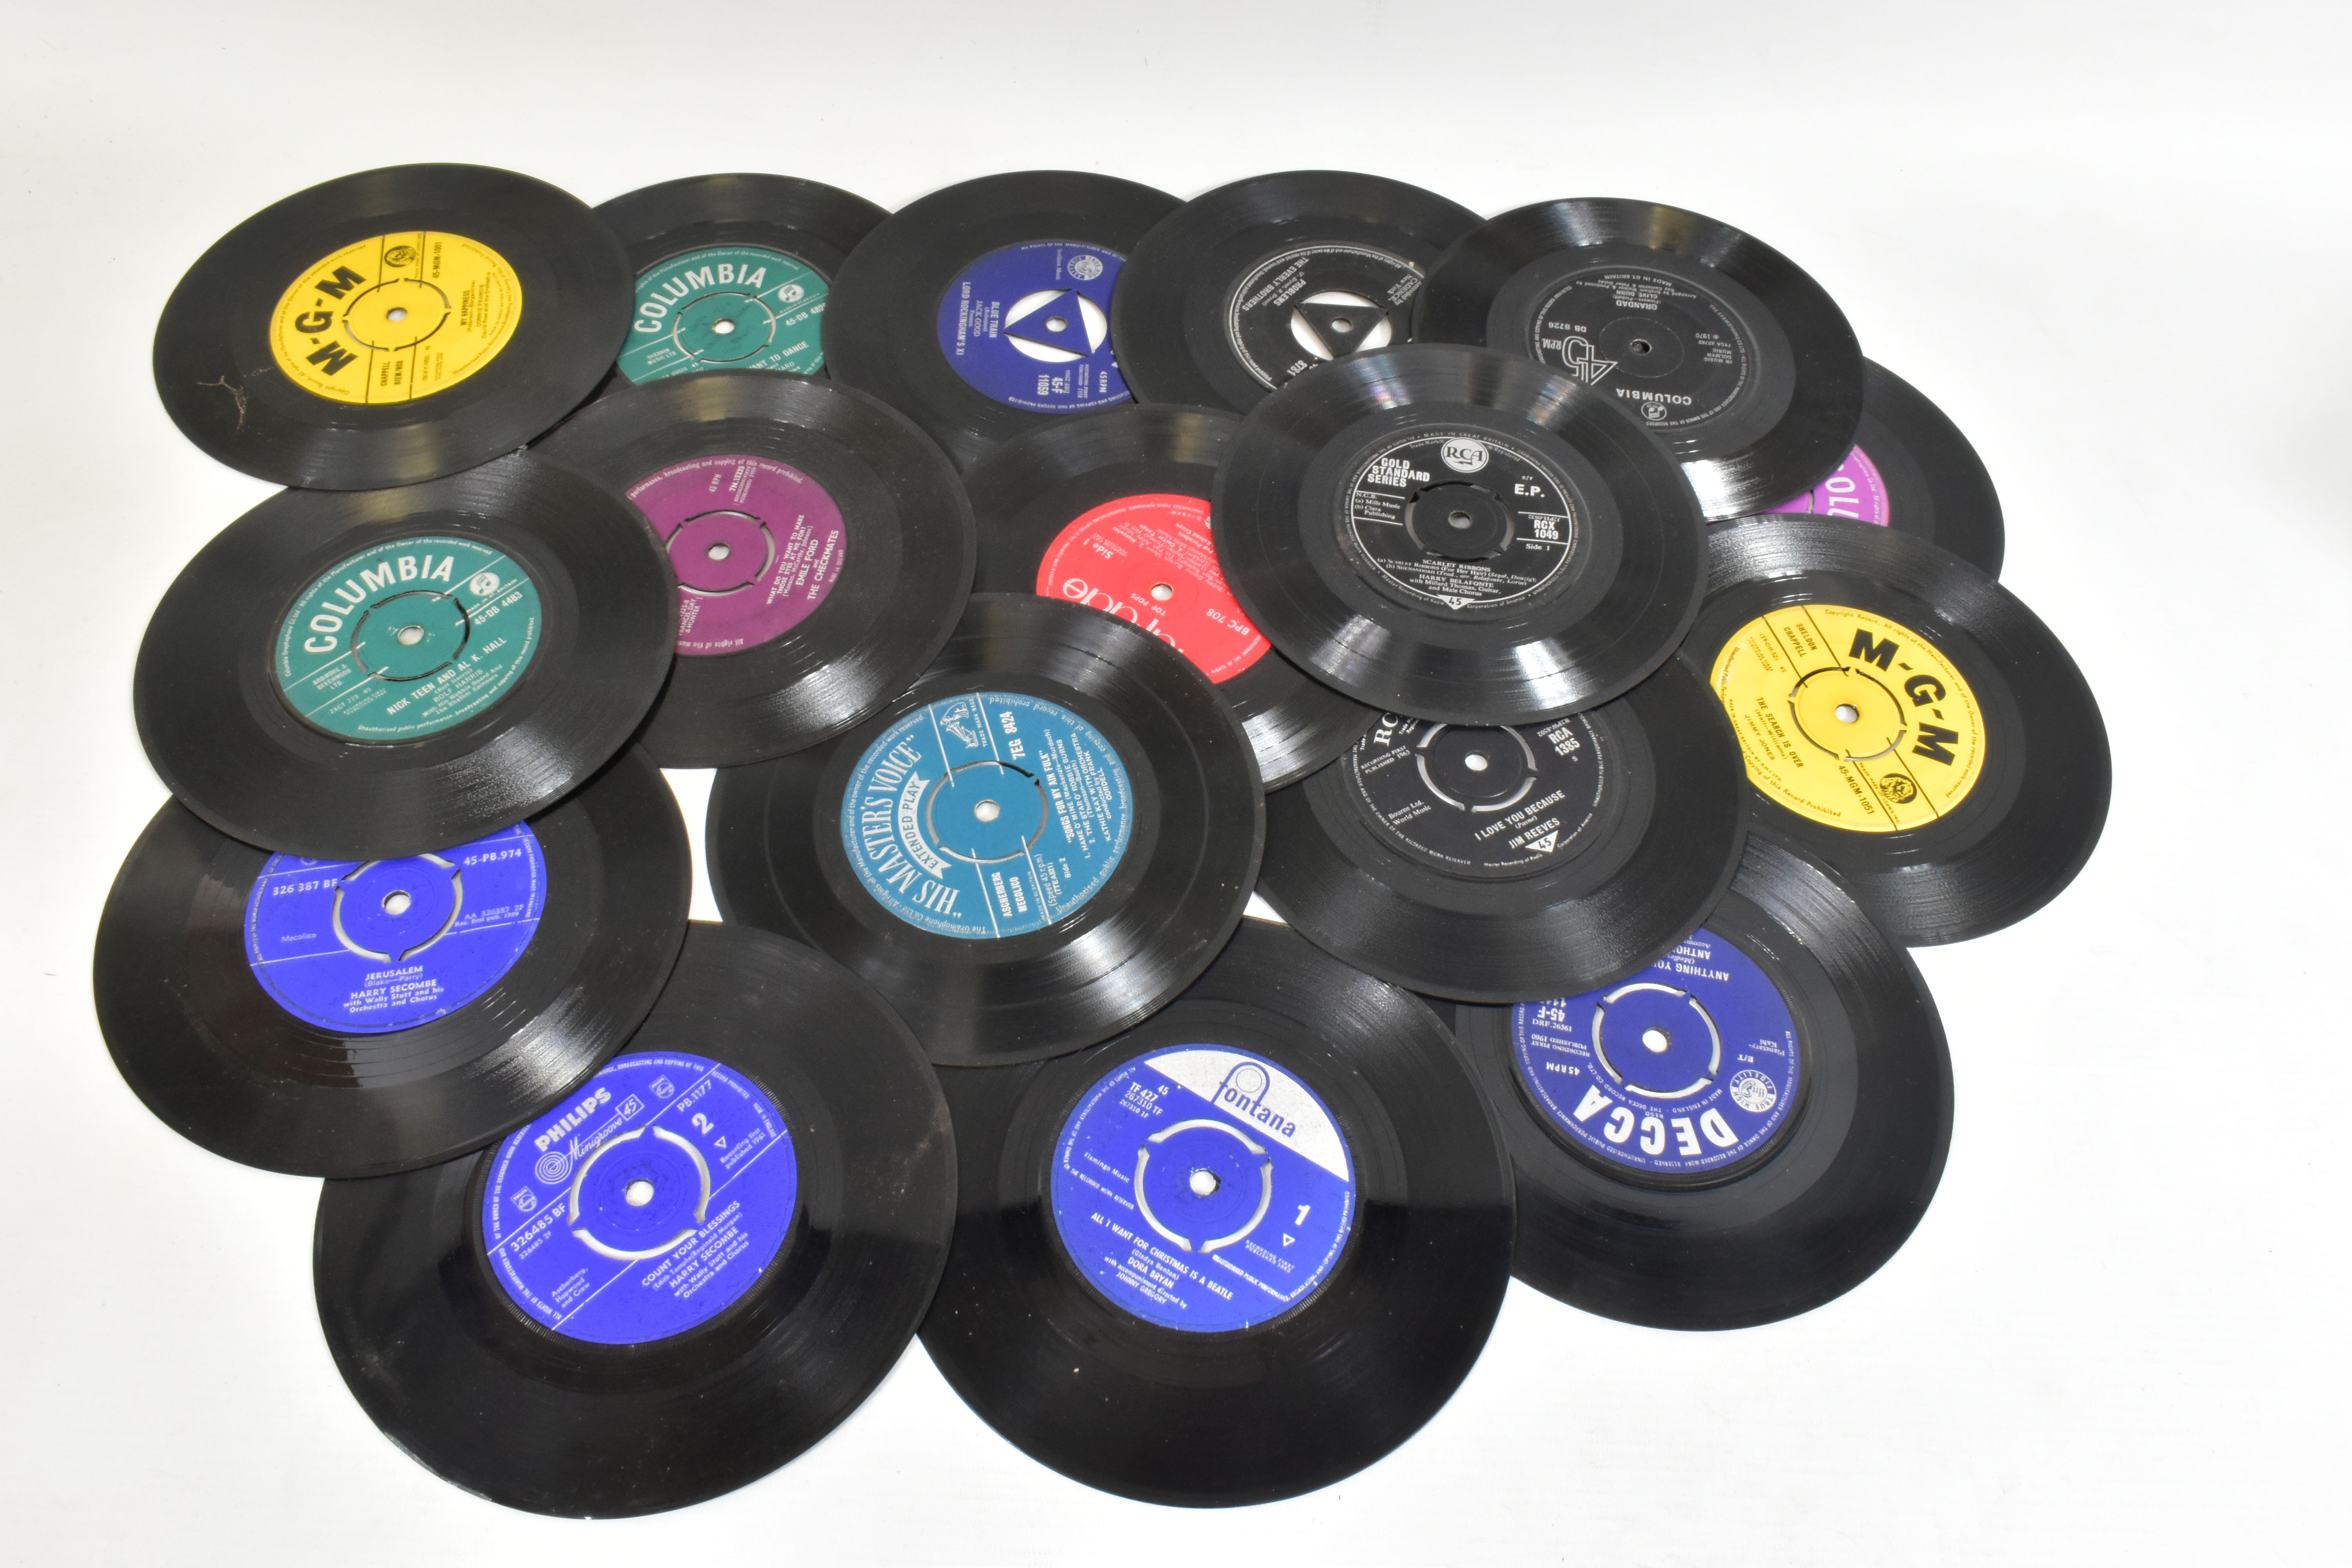 TWO TRAYS CONTAINING OVER ONE HUNDRED AND FIFTY SINGLES mostly from the 1970s and 1980s artista - Image 2 of 6